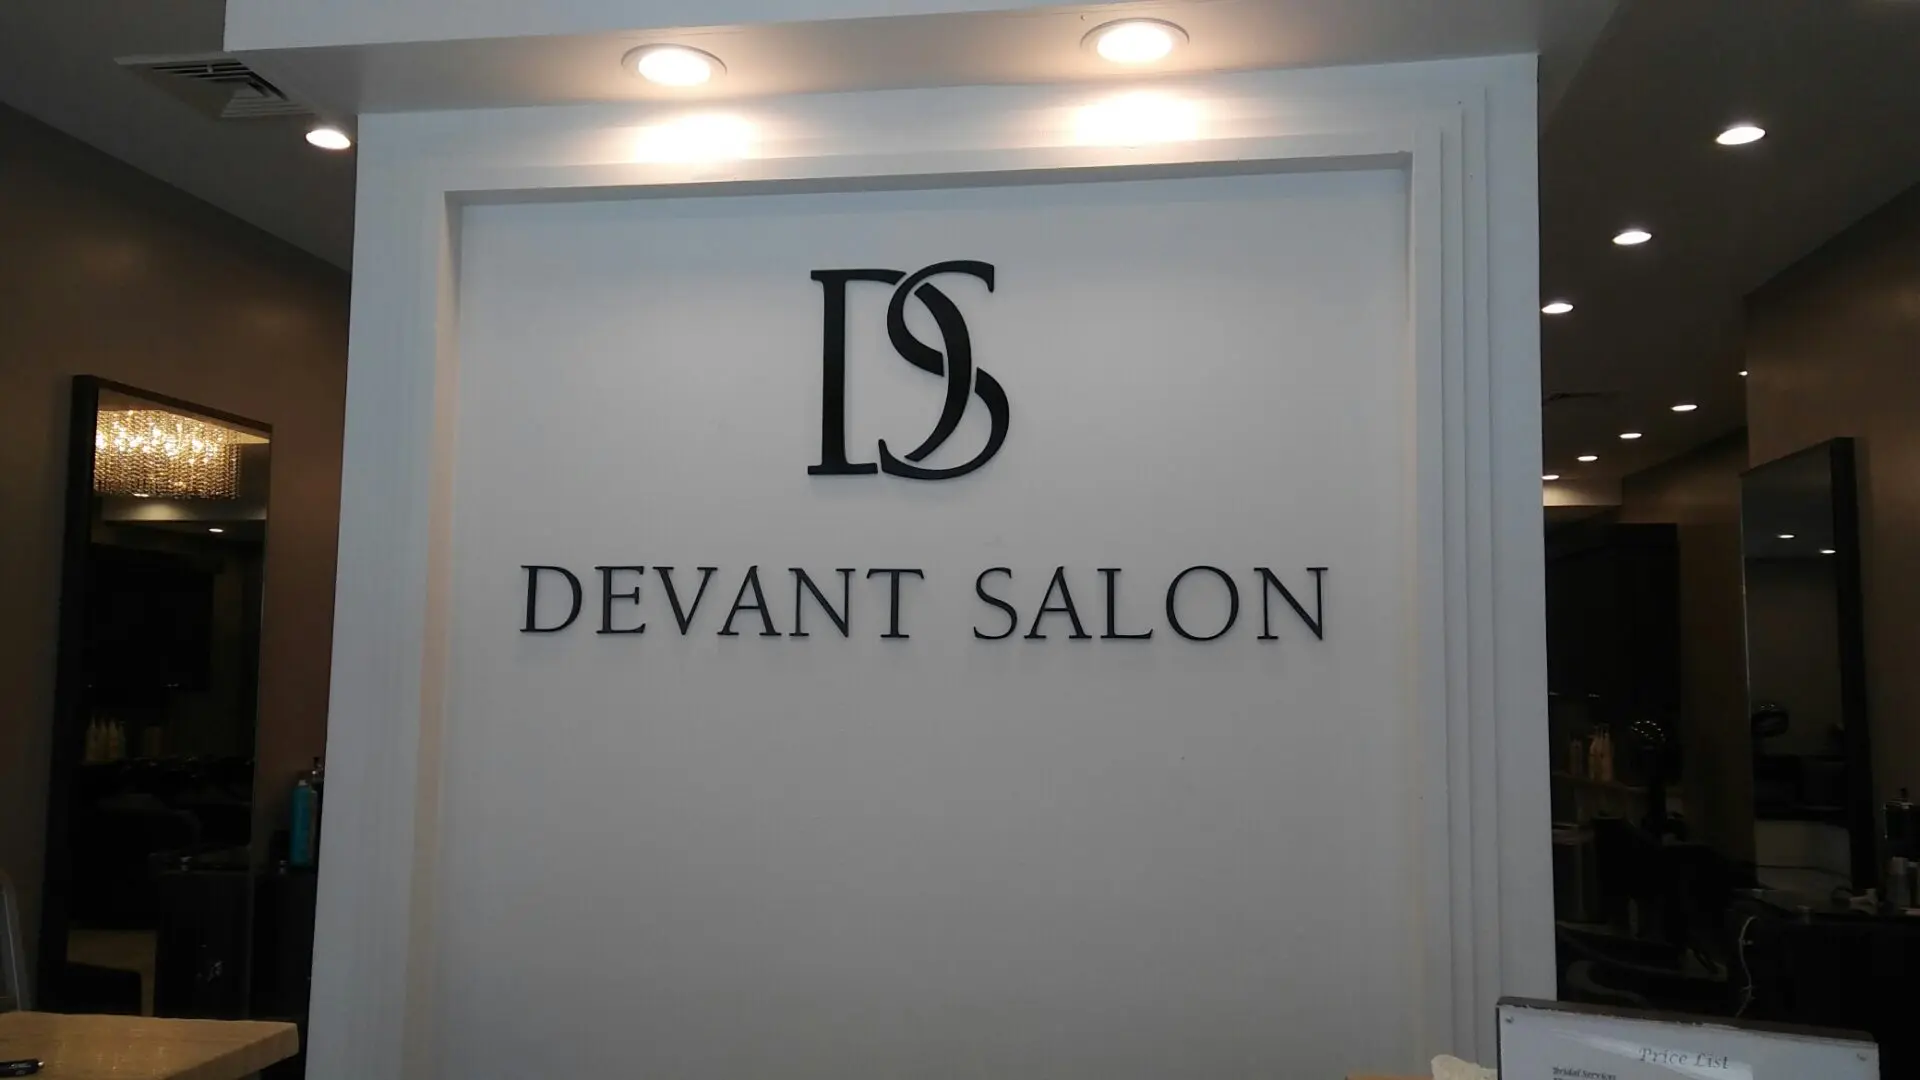 Signage of deviant salon with a logo above the text, displayed on a gray wall inside a well-lit gallery.